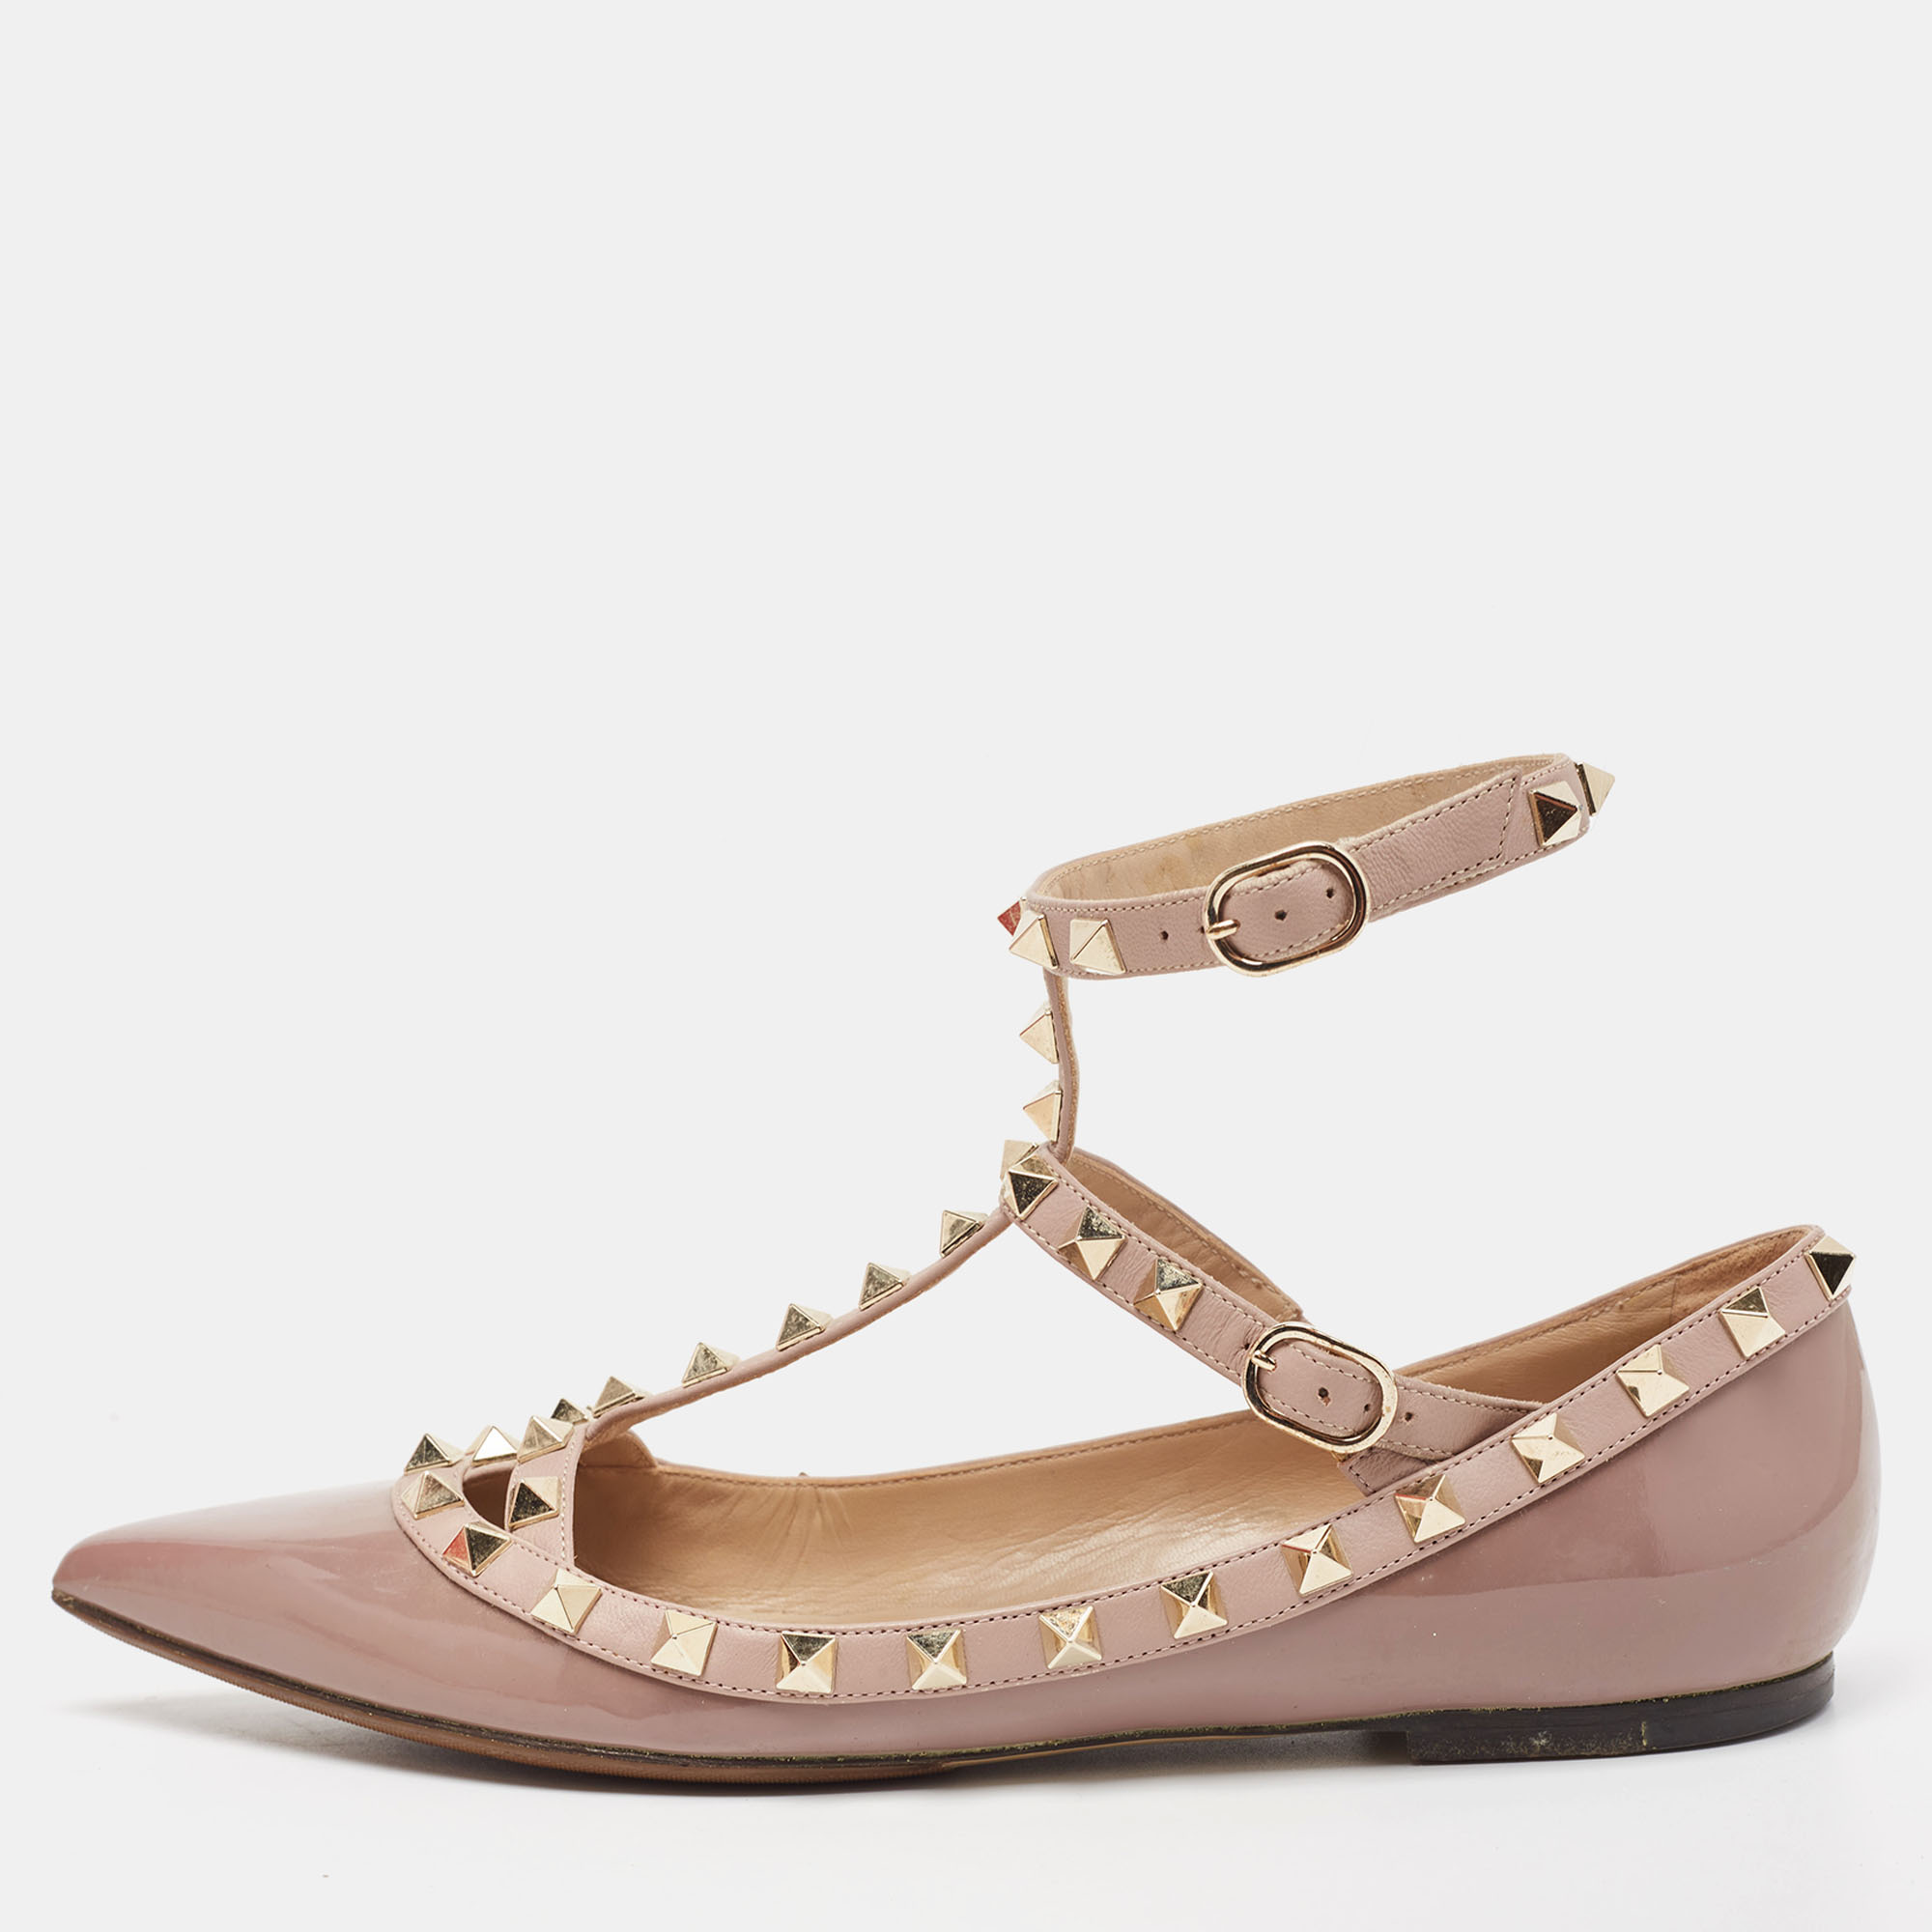 Valentino old rose patent and leather rockstud ballet flats size 38